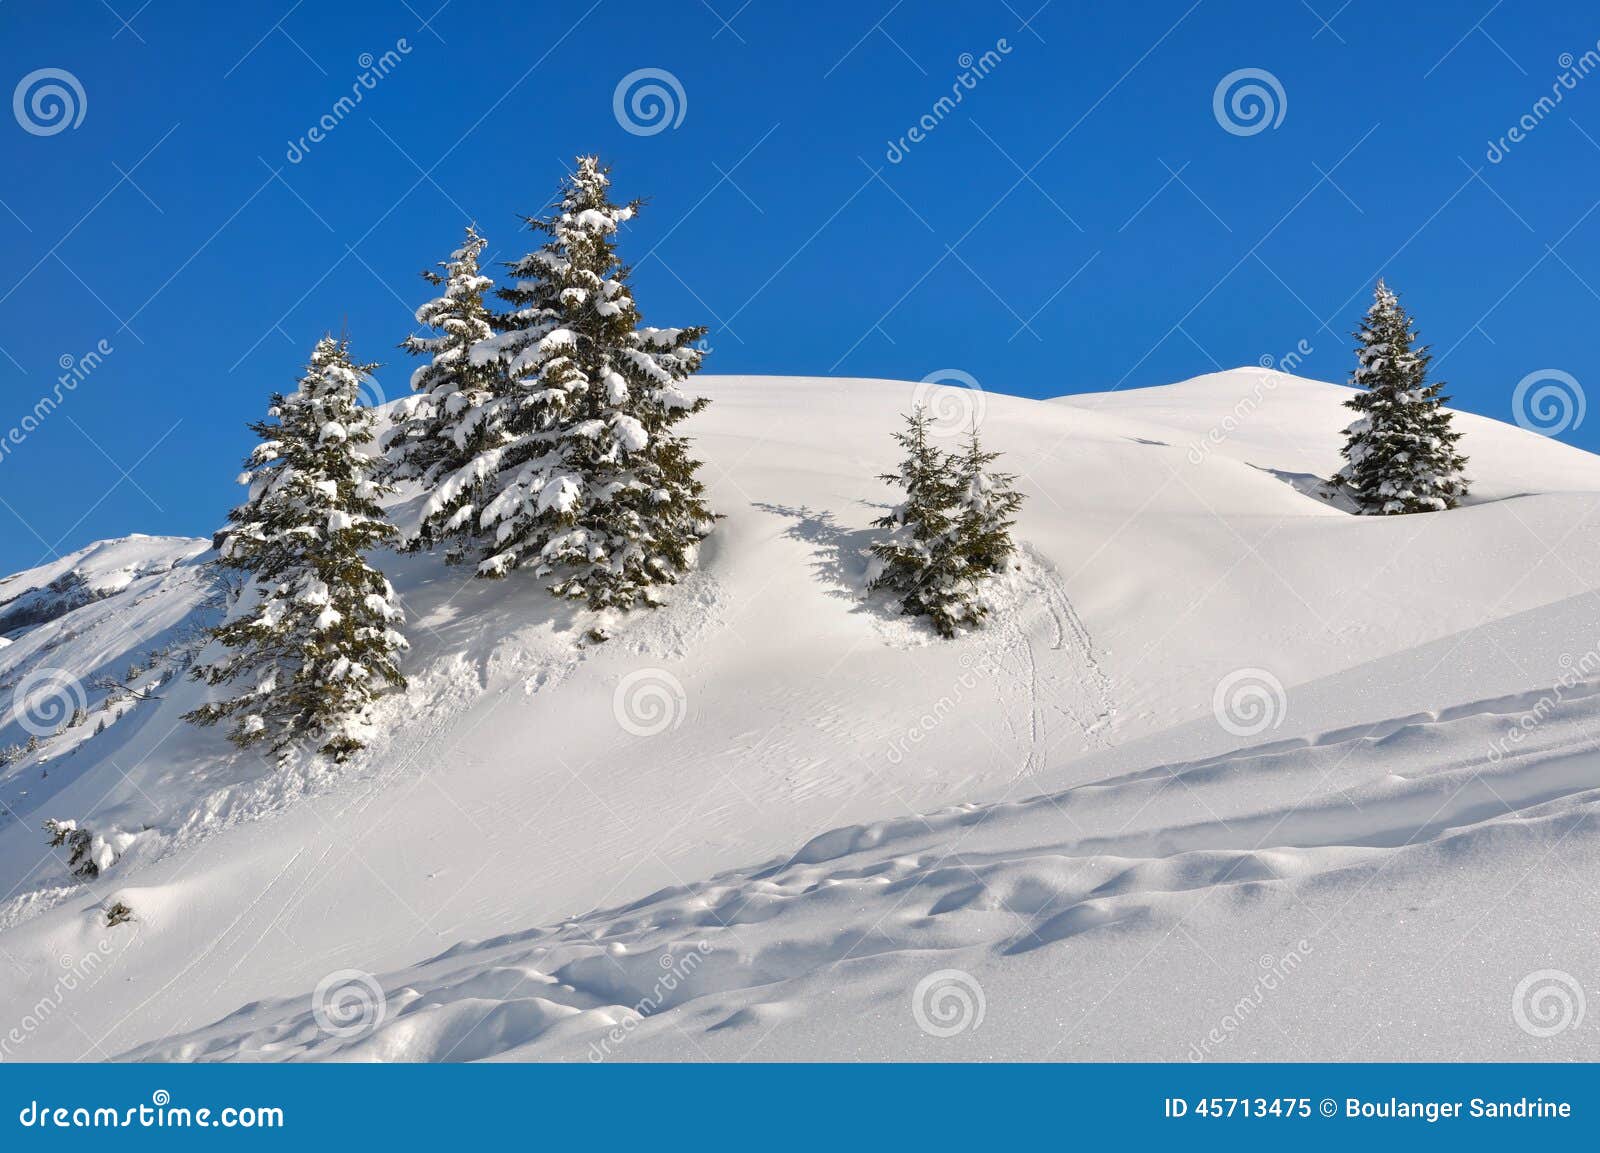 Firs in the snow. Small fir trees covered with snow on small hills under beautiful blue sky